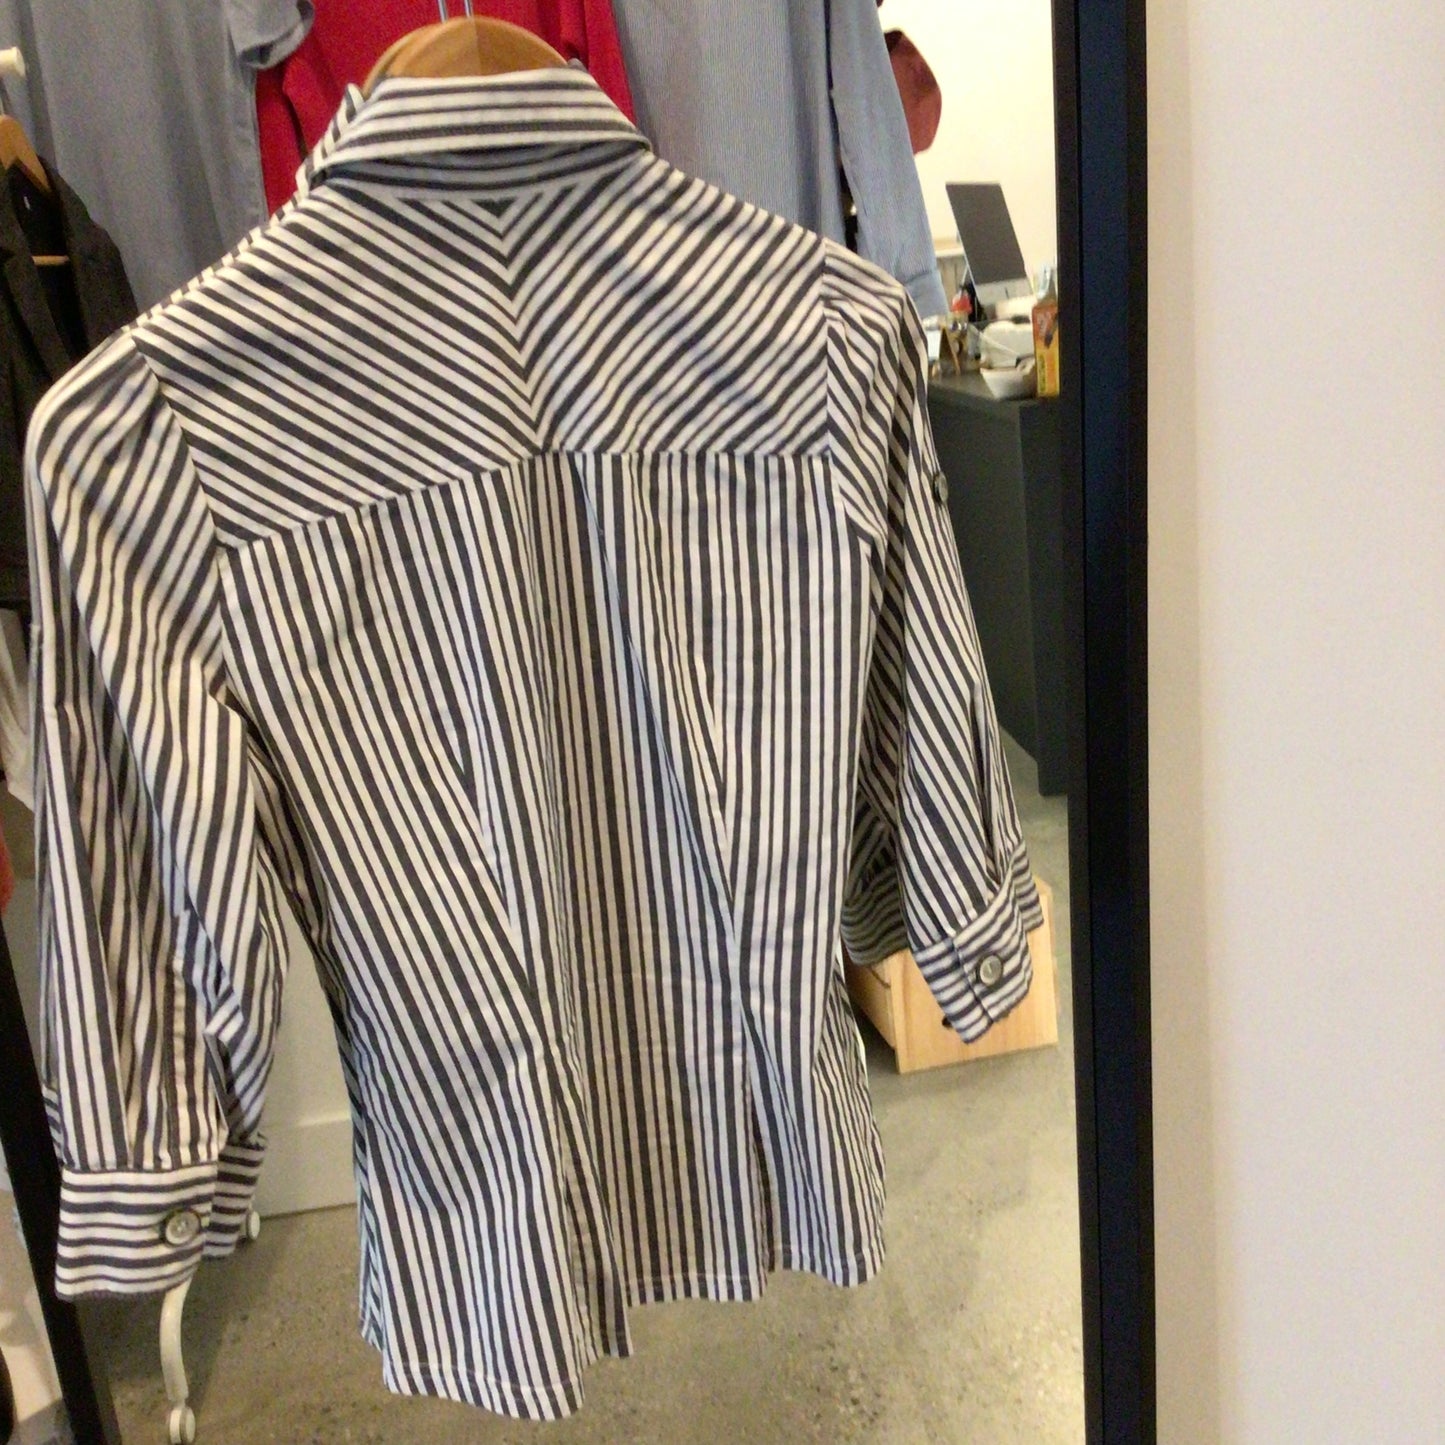 Consignment 1011-12 Next, grey & white stripped shirt size 6